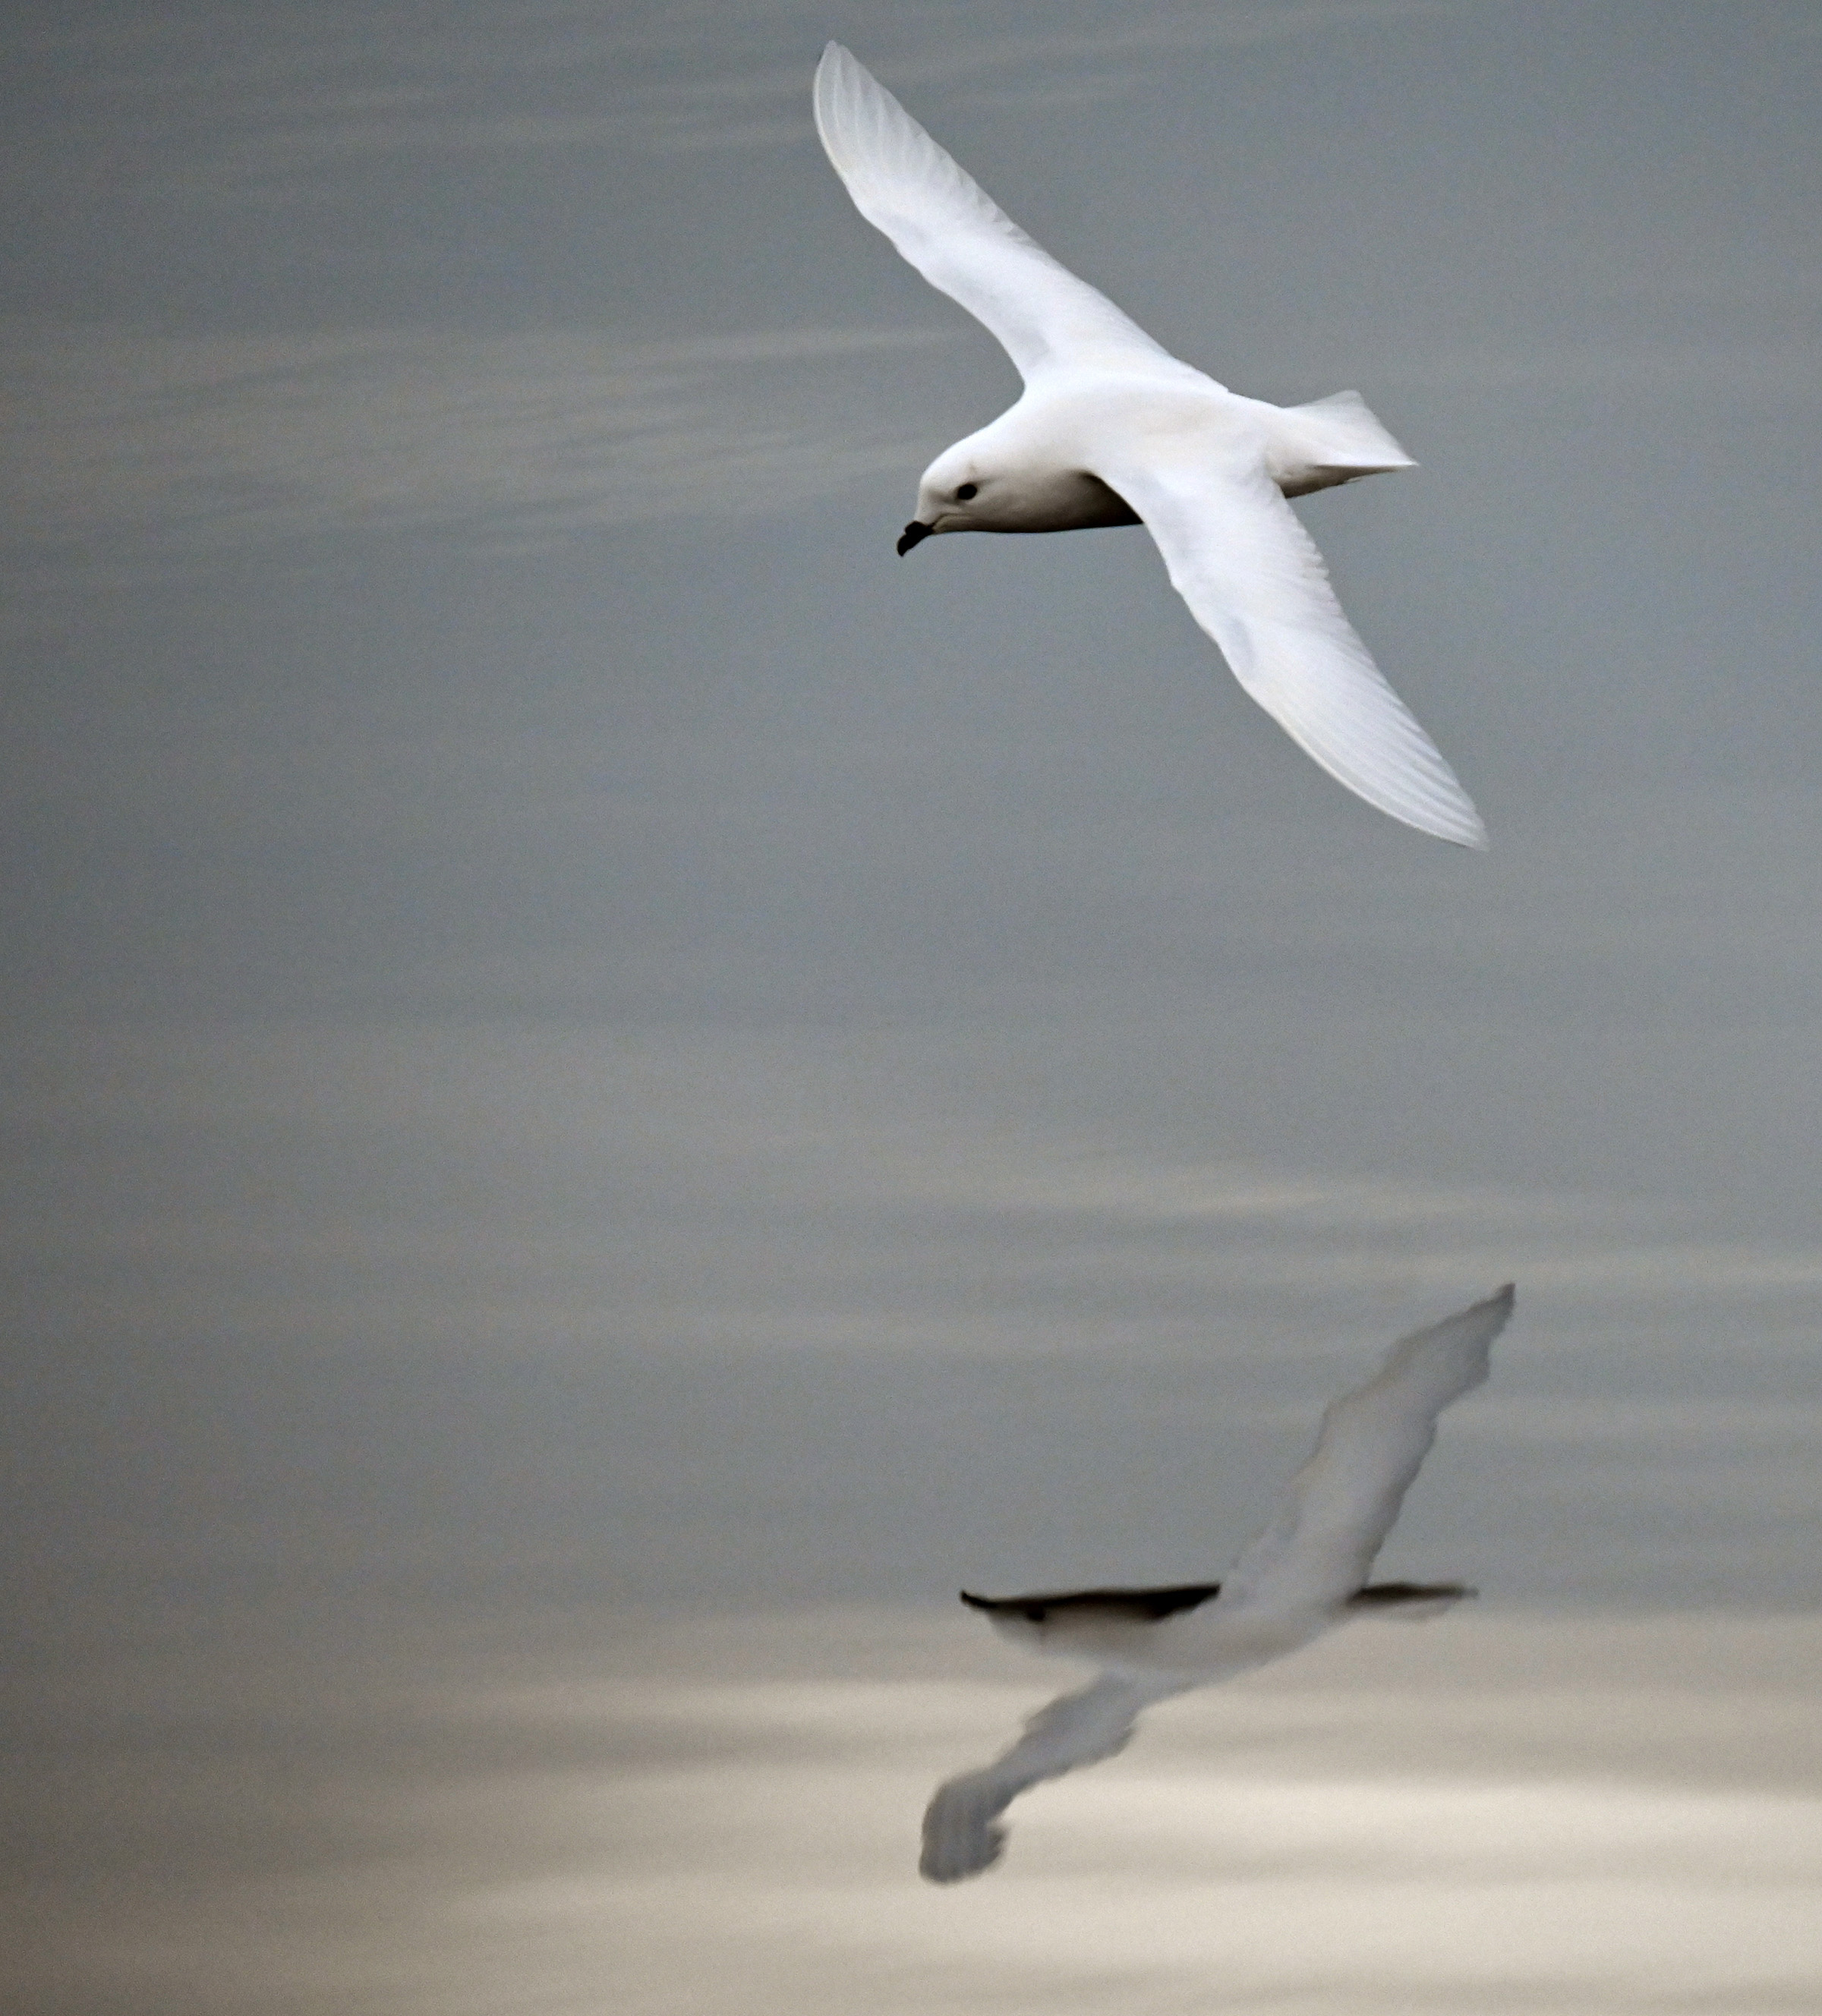 A white bird flies low over water. The bird's reflection can be seen on the water surface.